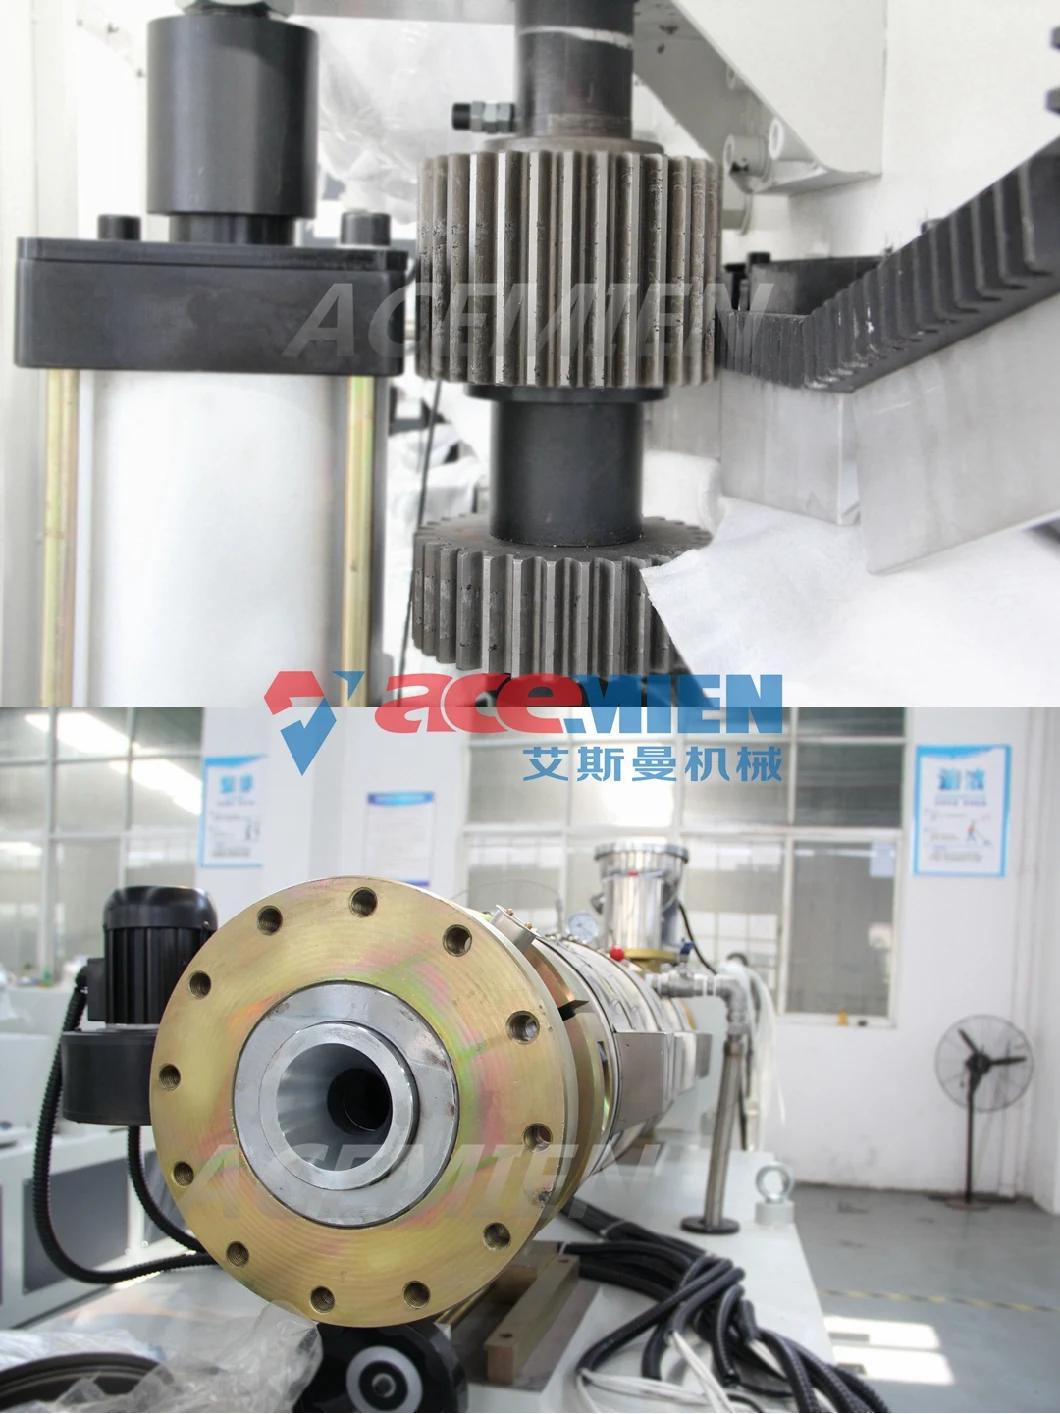 Hot Steam Washing Recycling Machine for Plastic PP PE HDPE LDPE LLDPE Film Bags